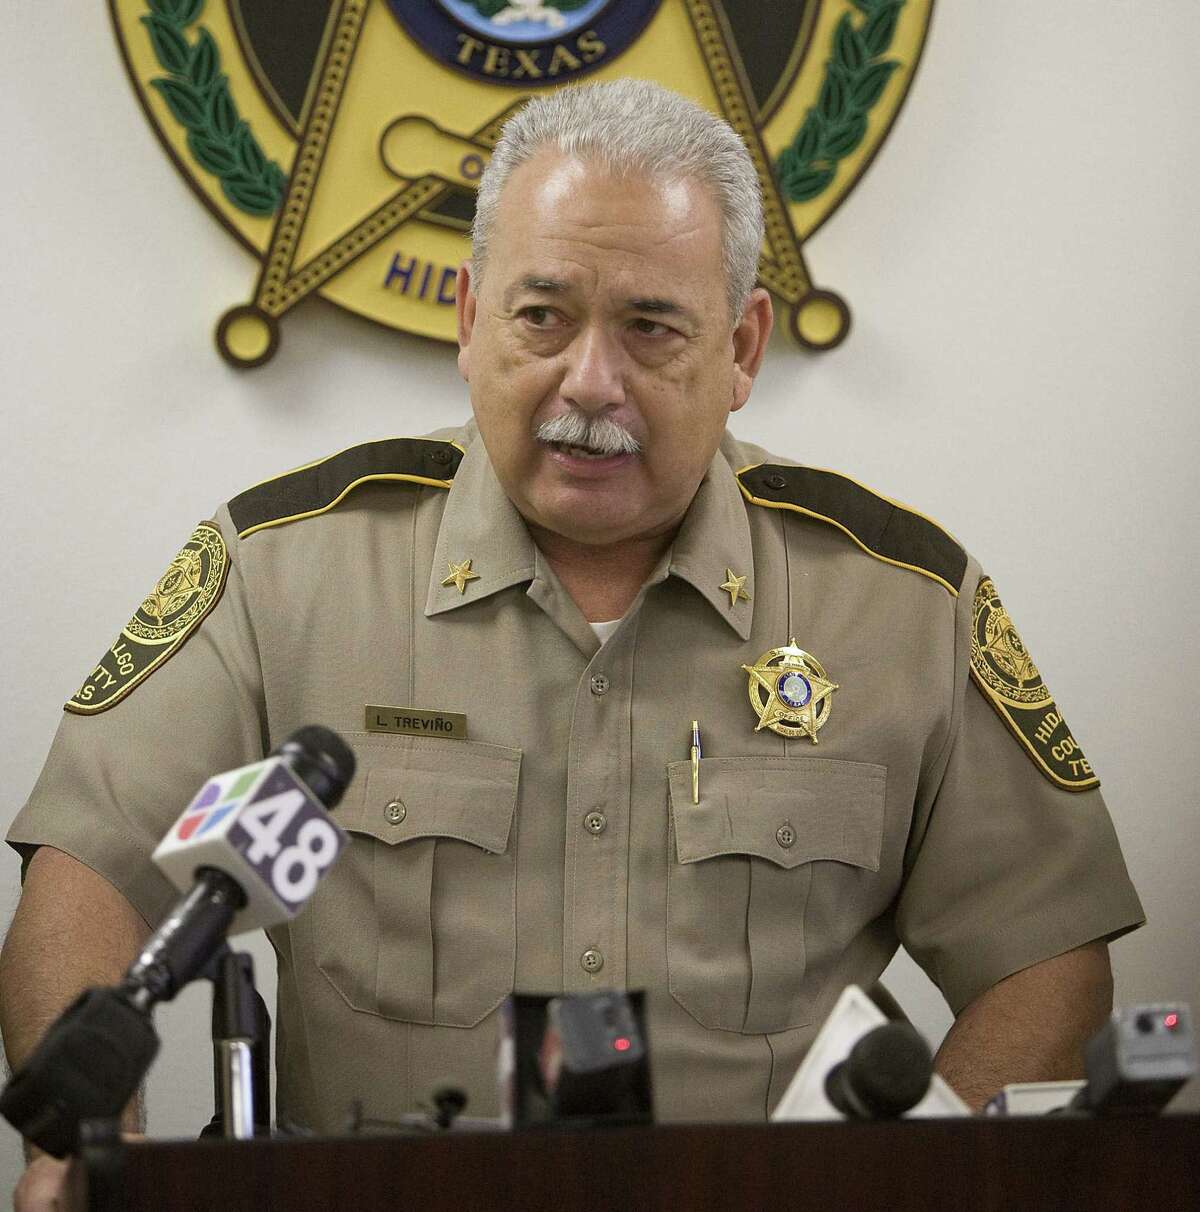 Hidalgo County Sheriff Guadalupe “Lupe” Trevino cited “internal and external pressures” in submitting his resignation Friday. His tenure as sheriff has been plagued by controversy.